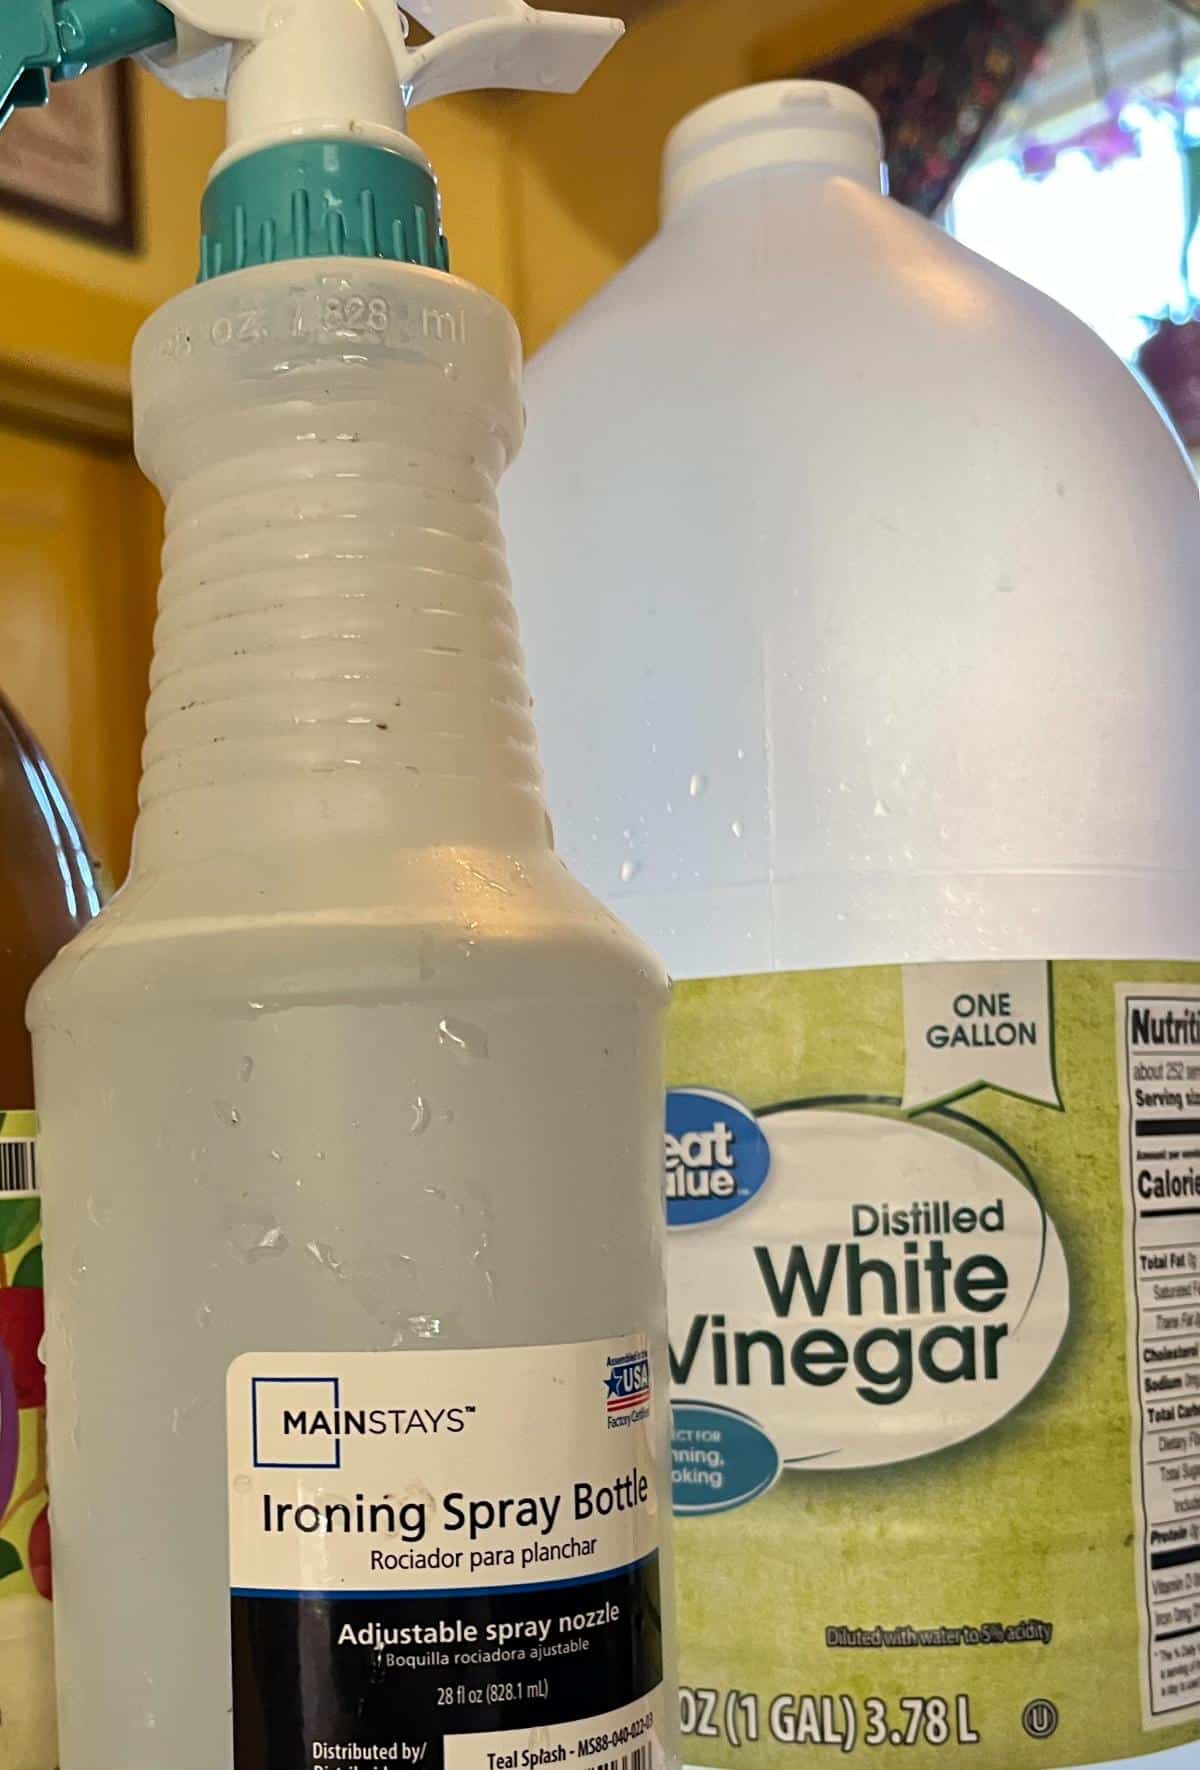 A spray bottle of vinegar to use against ants